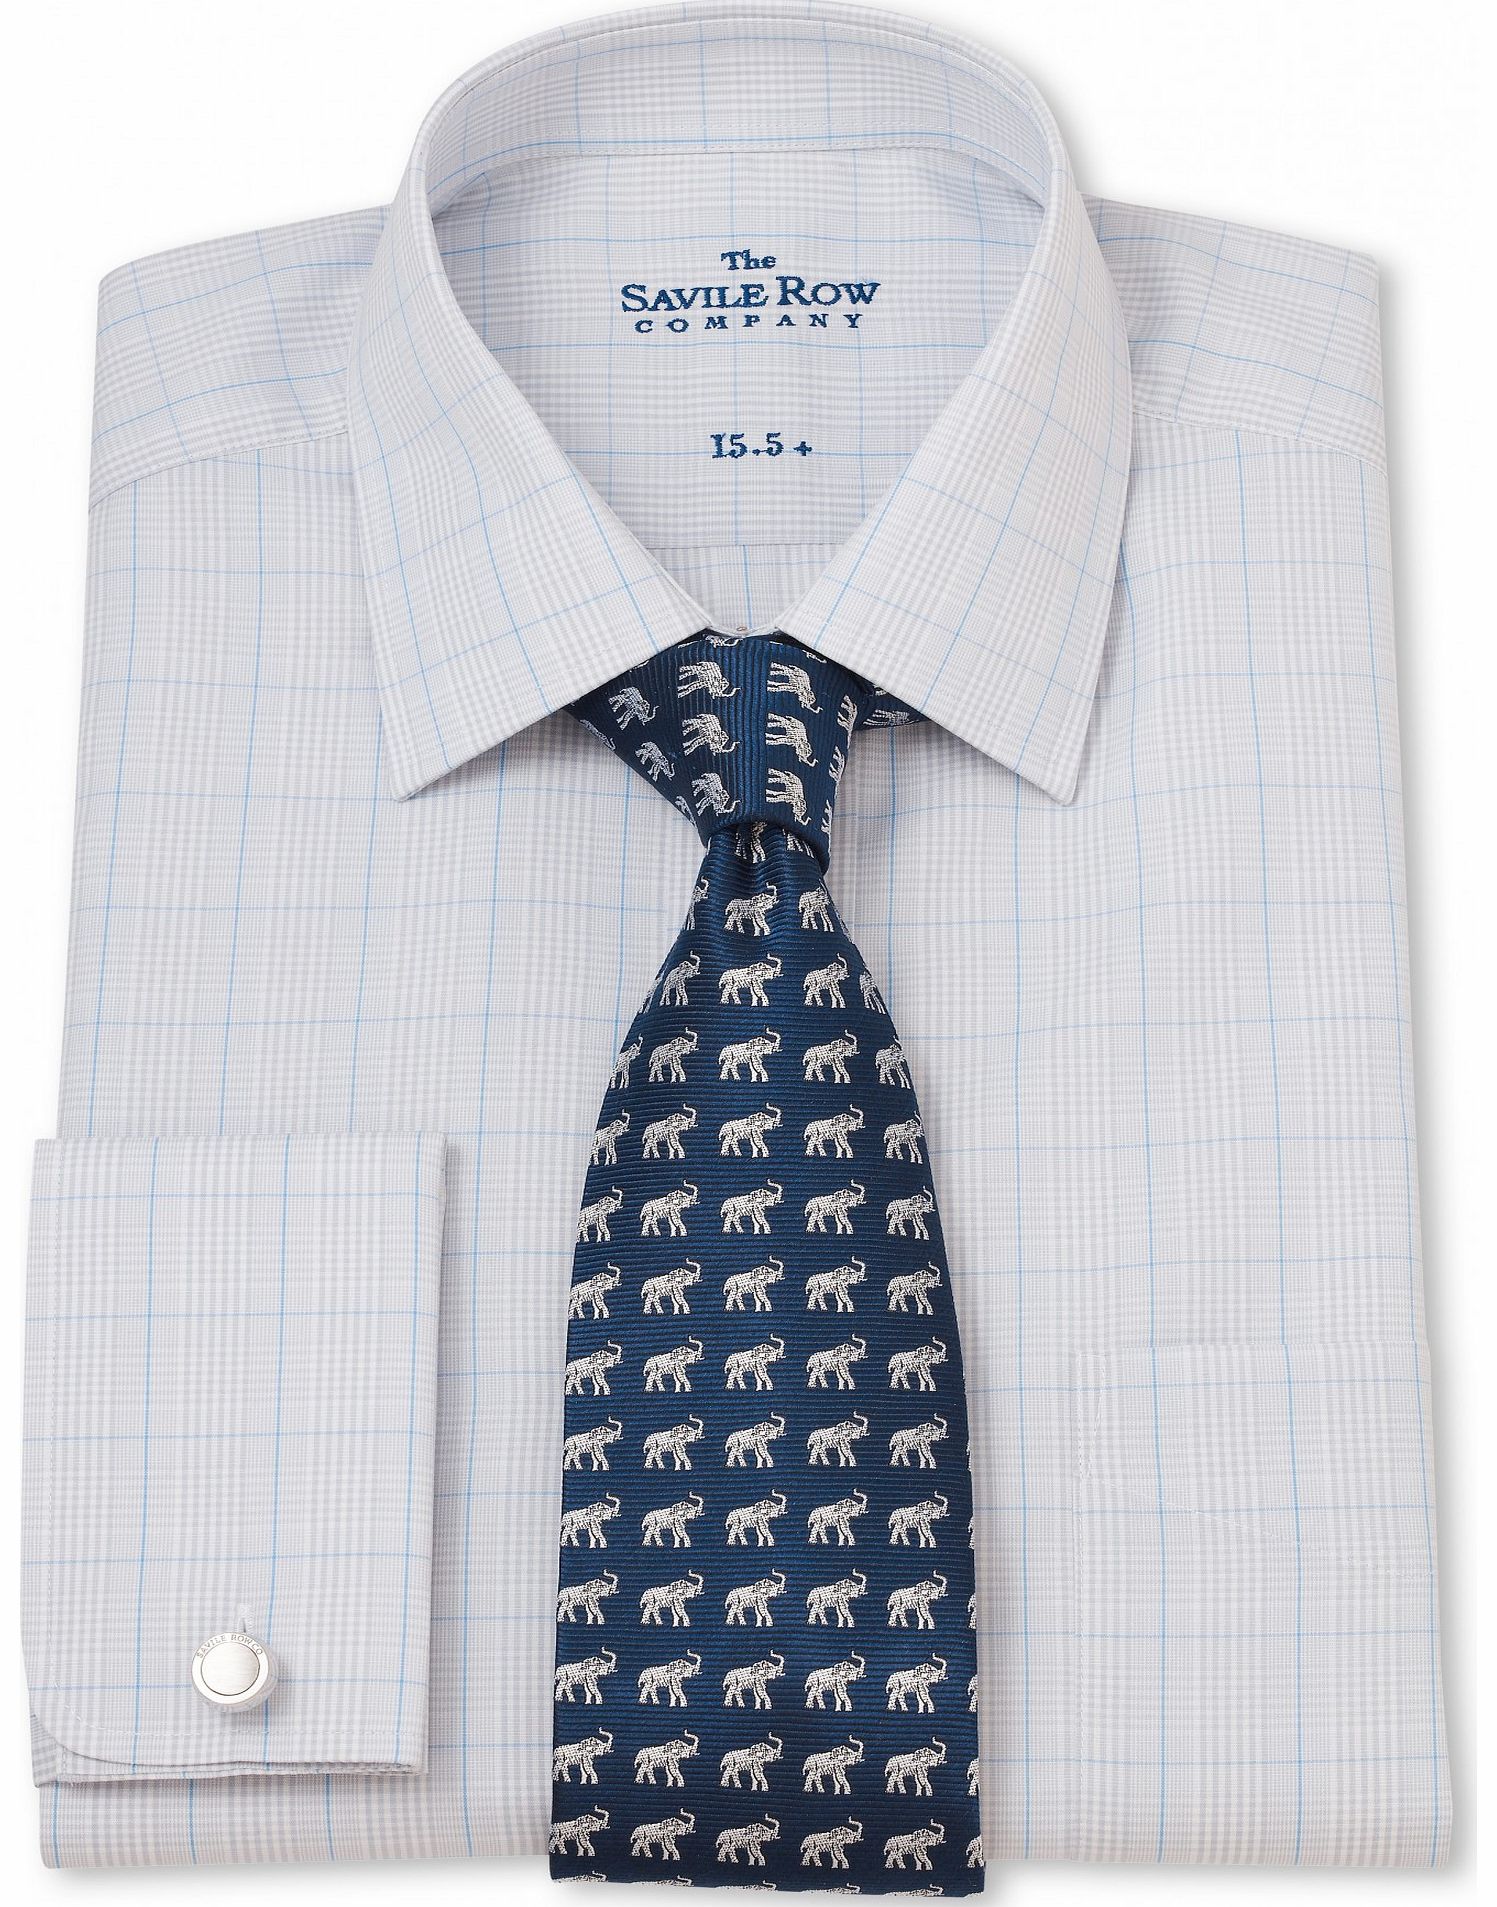 Savile Row Company Grey Blue Prince Of Wales Check Classic Fit